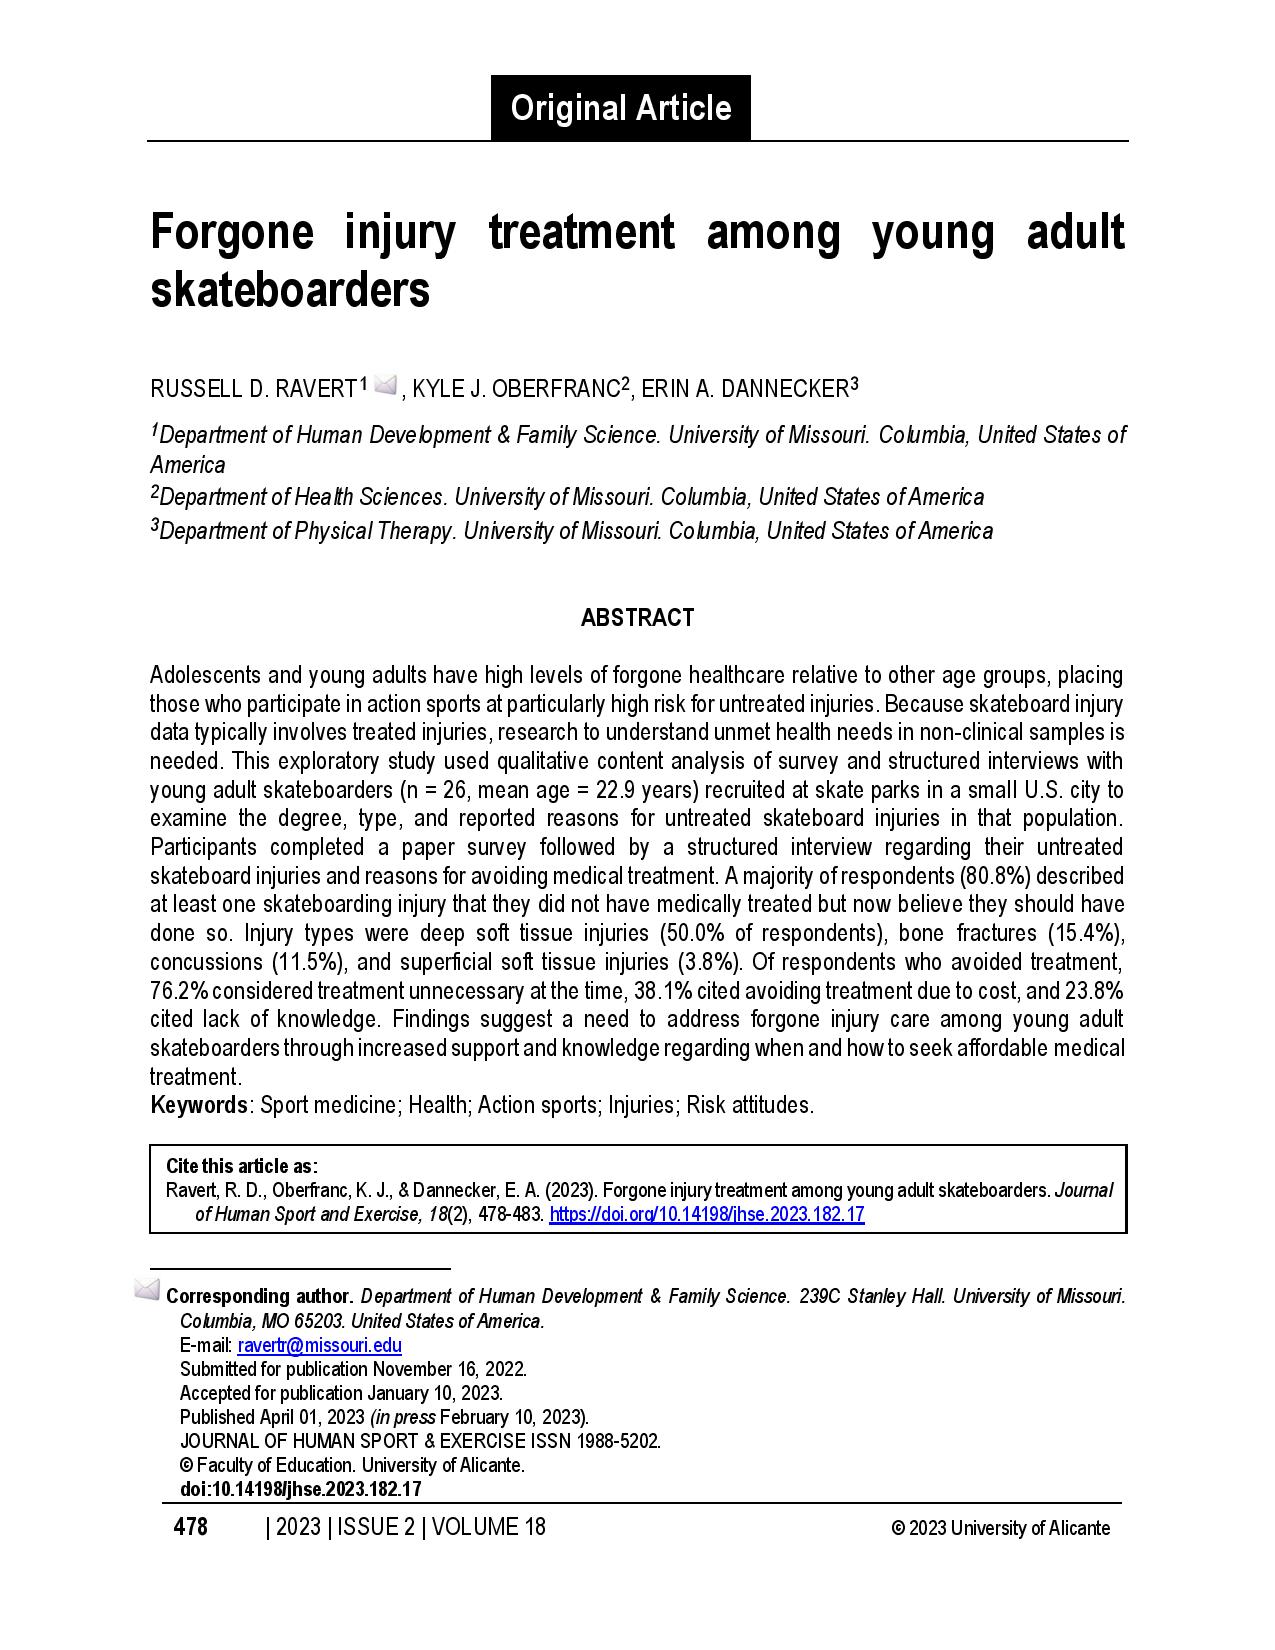 Forgone injury treatment among young adult skateboarders